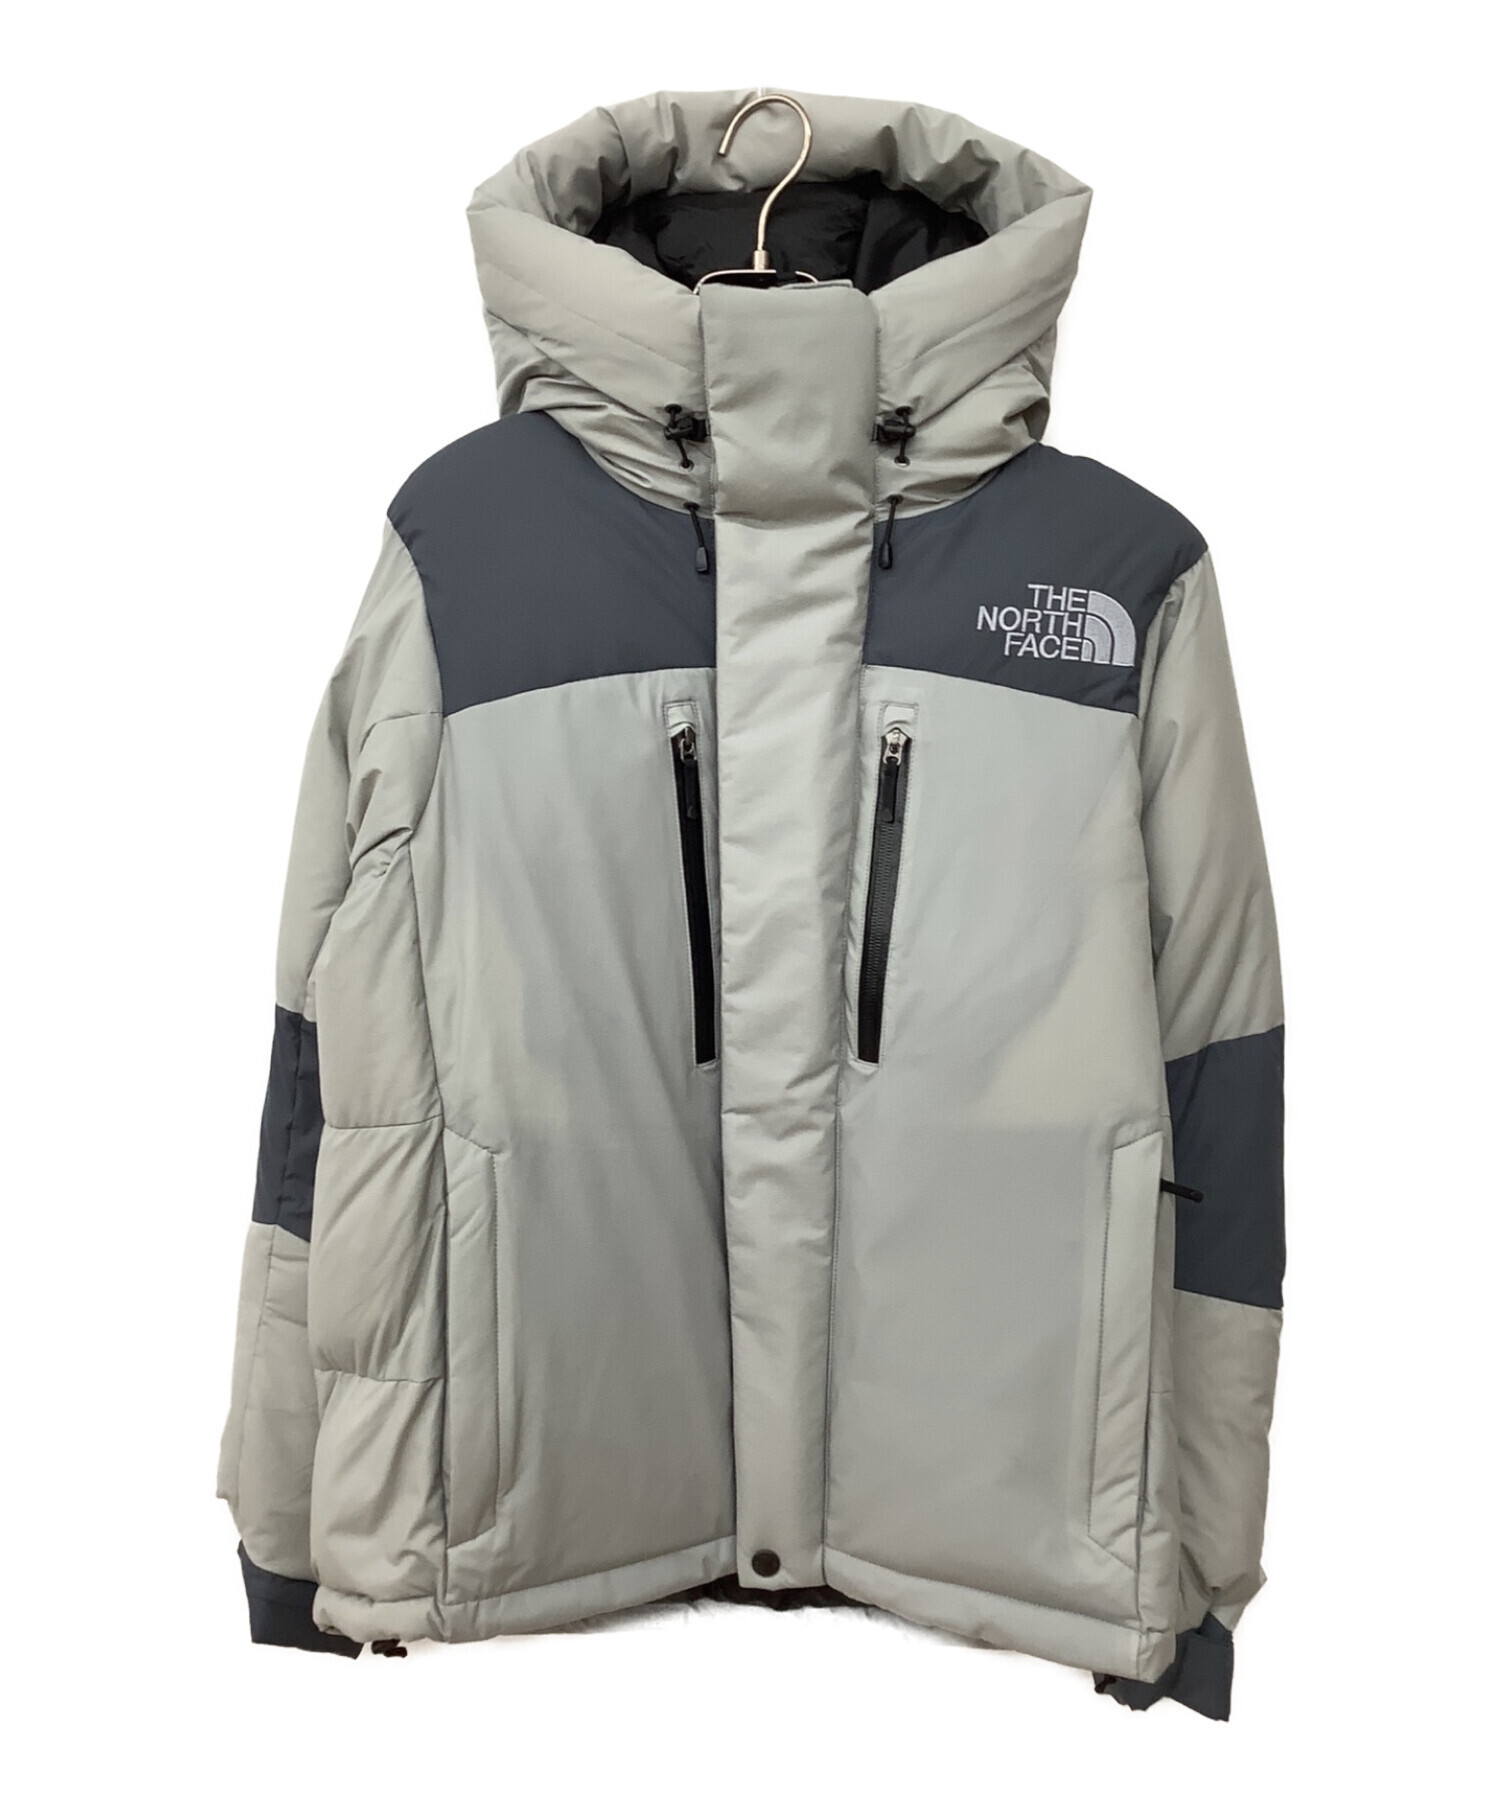 THE NORTH FACE バルトロライトジャケット 未使用